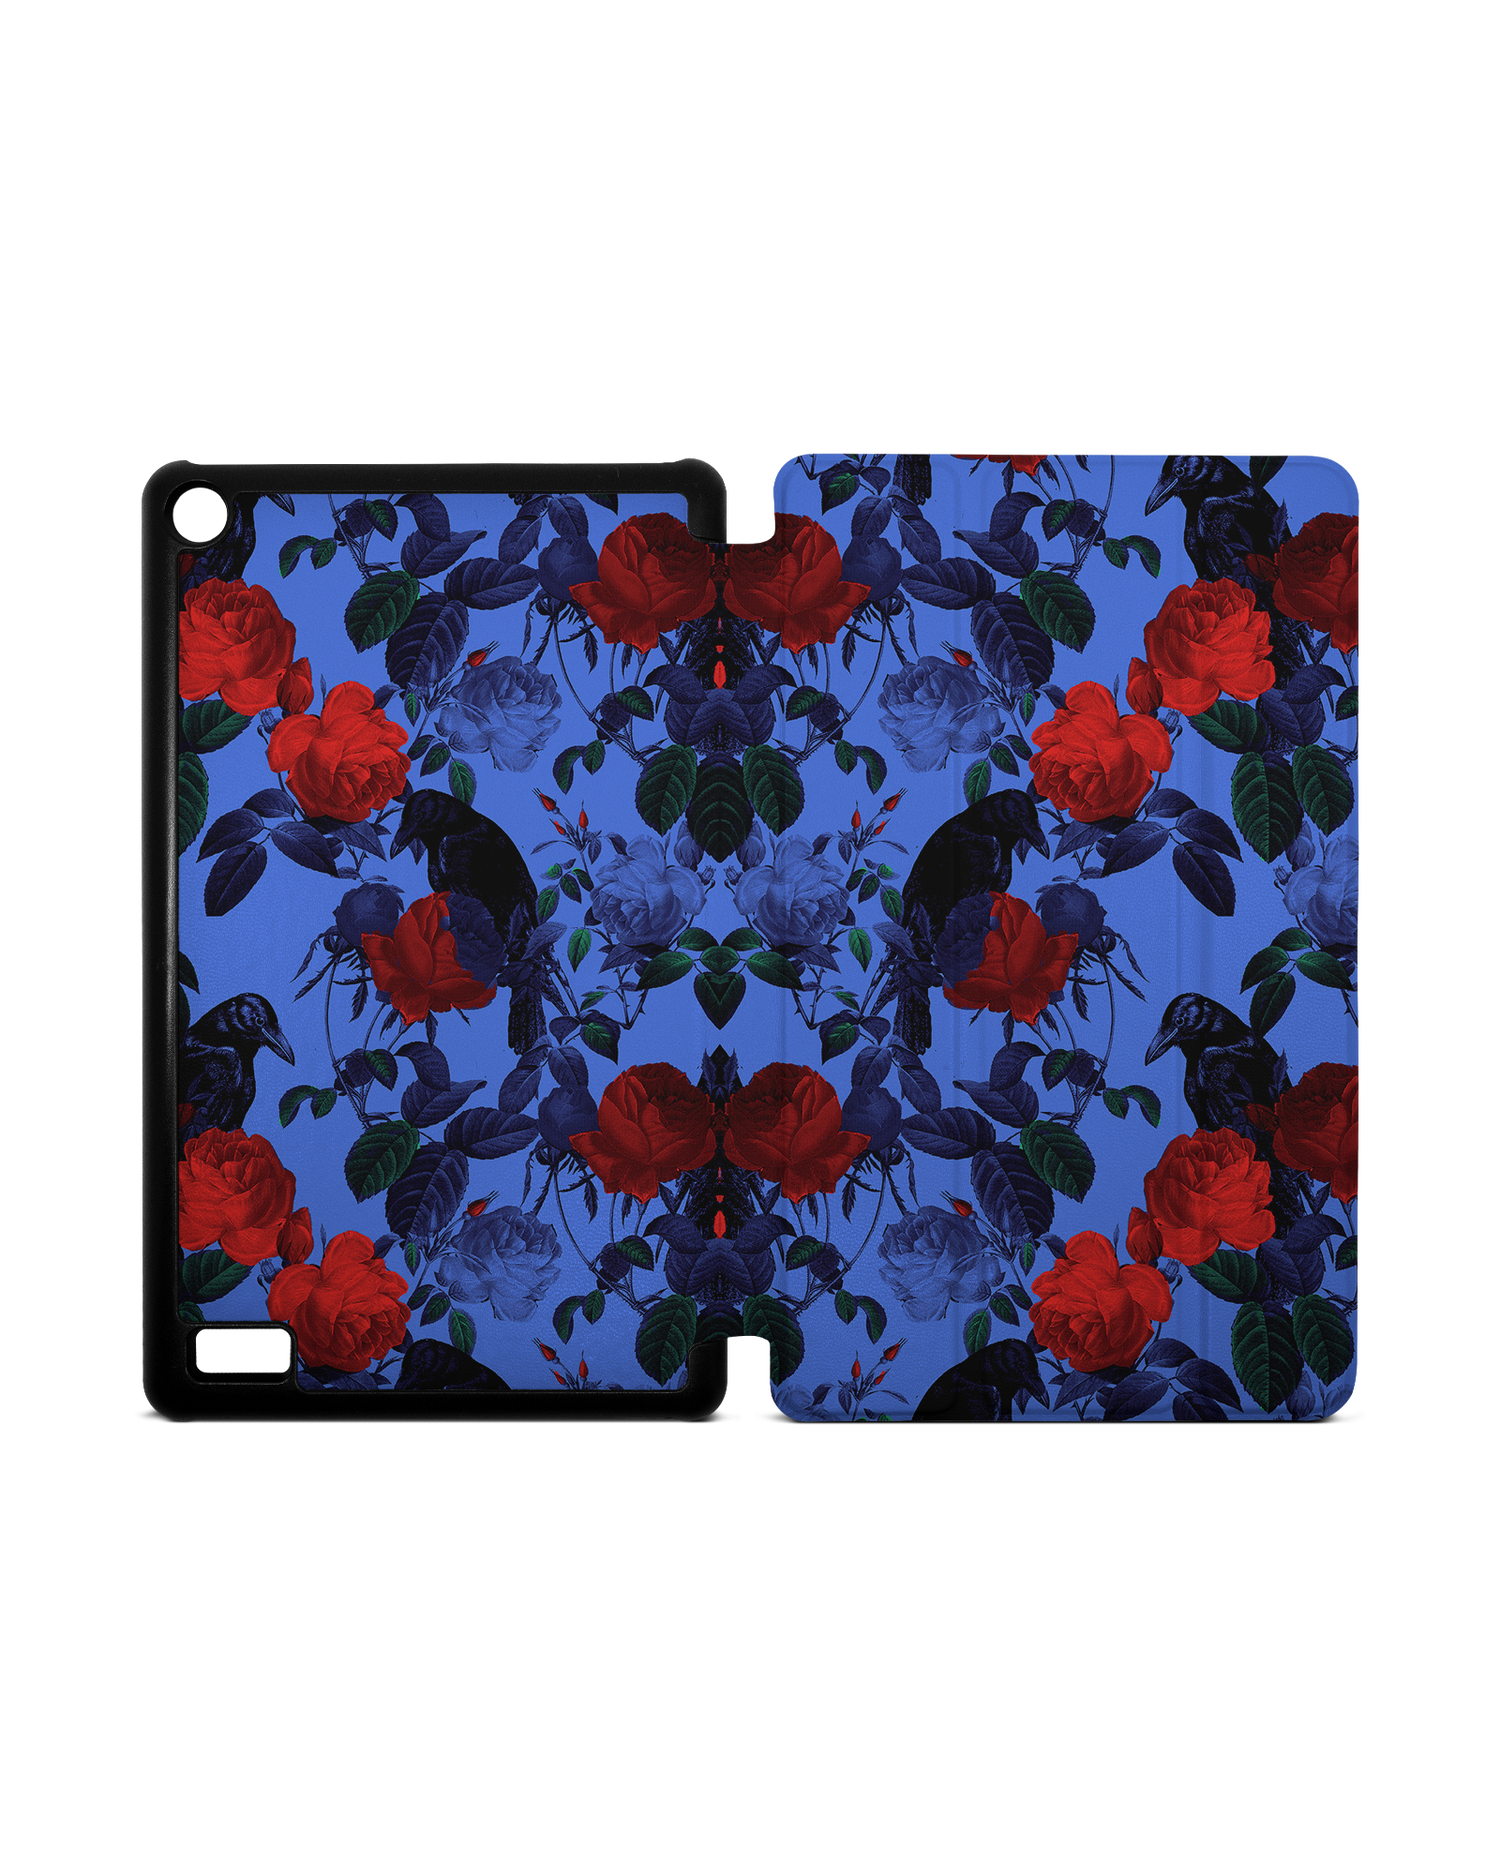 Roses And Ravens Tablet Smart Case for Amazon Fire 7: Opened